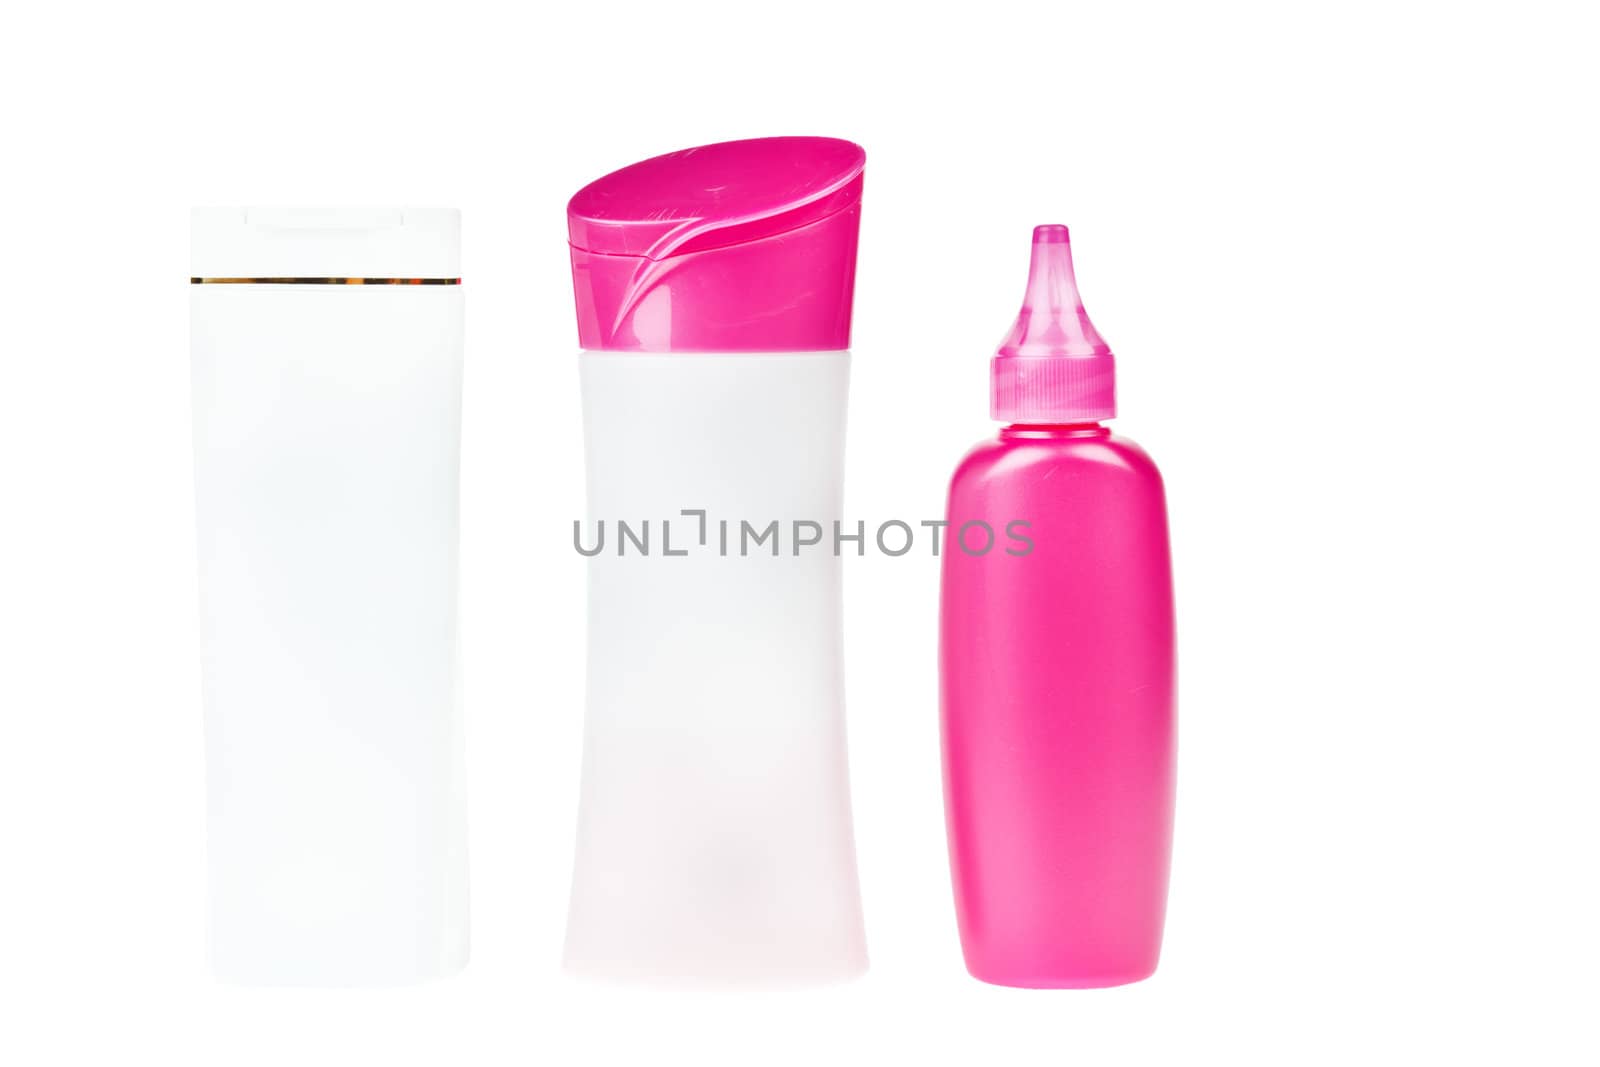 group of product packaging. isolated over white background  by FrameAngel